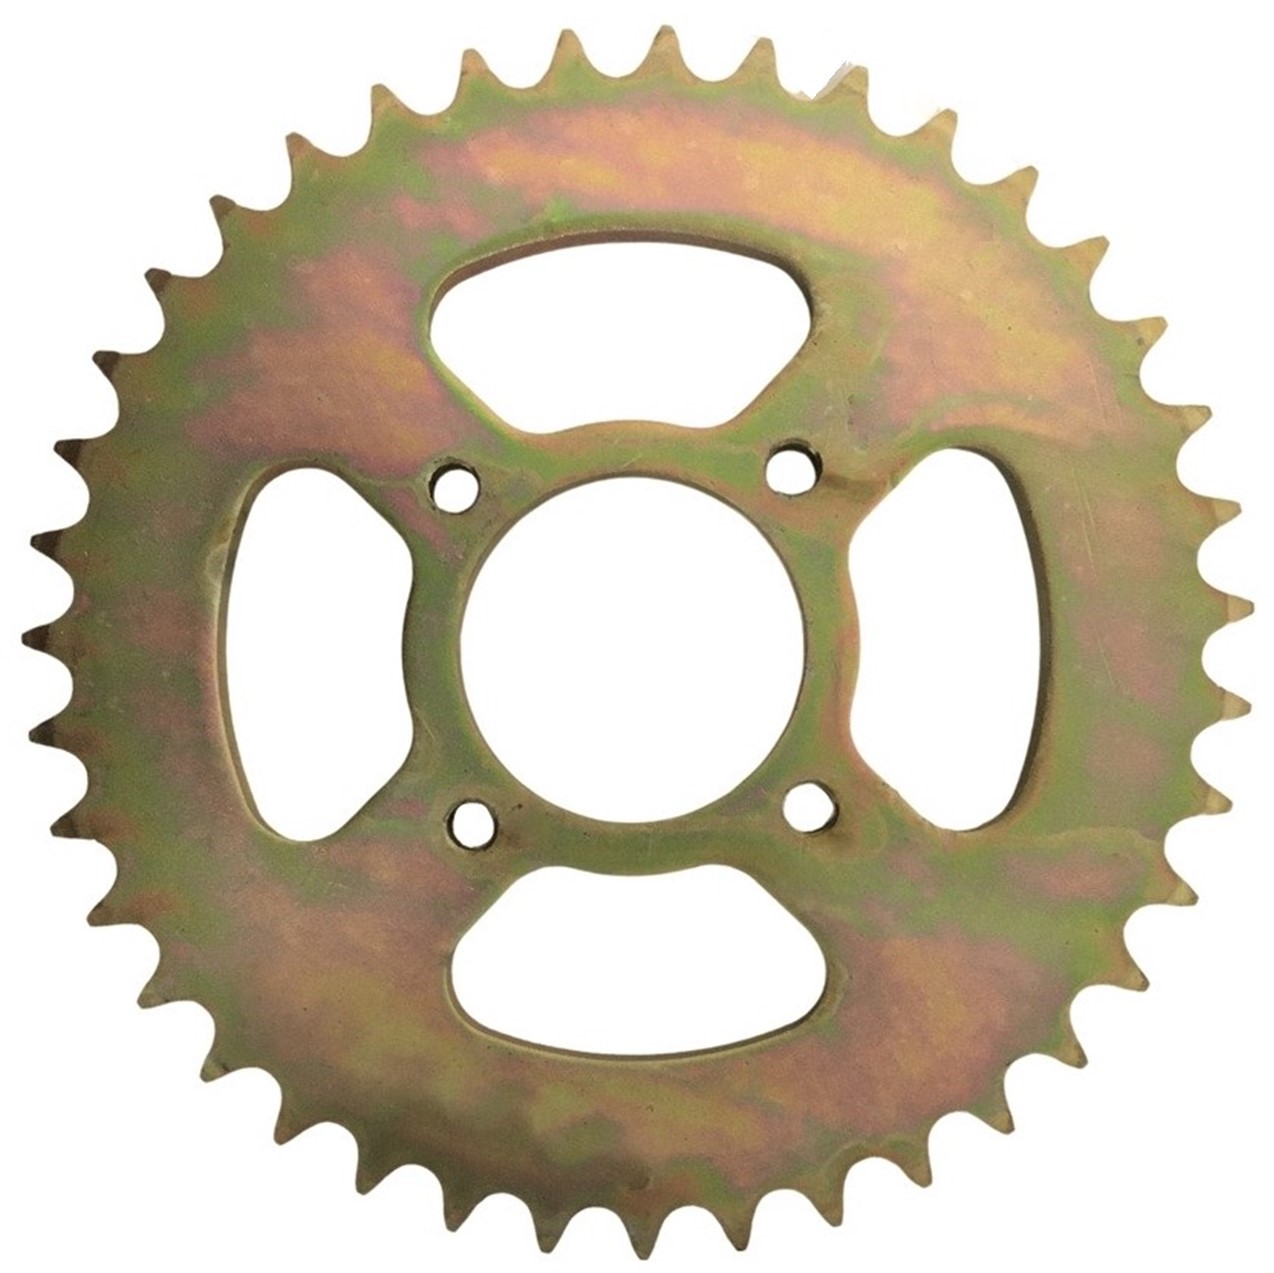 Rear Sprocket #530 39th Bolts Cross c/c=80 ID=58mm Fits Many Hammerhead TrailMaster + Other ATVs, GoKarts - Click Image to Close